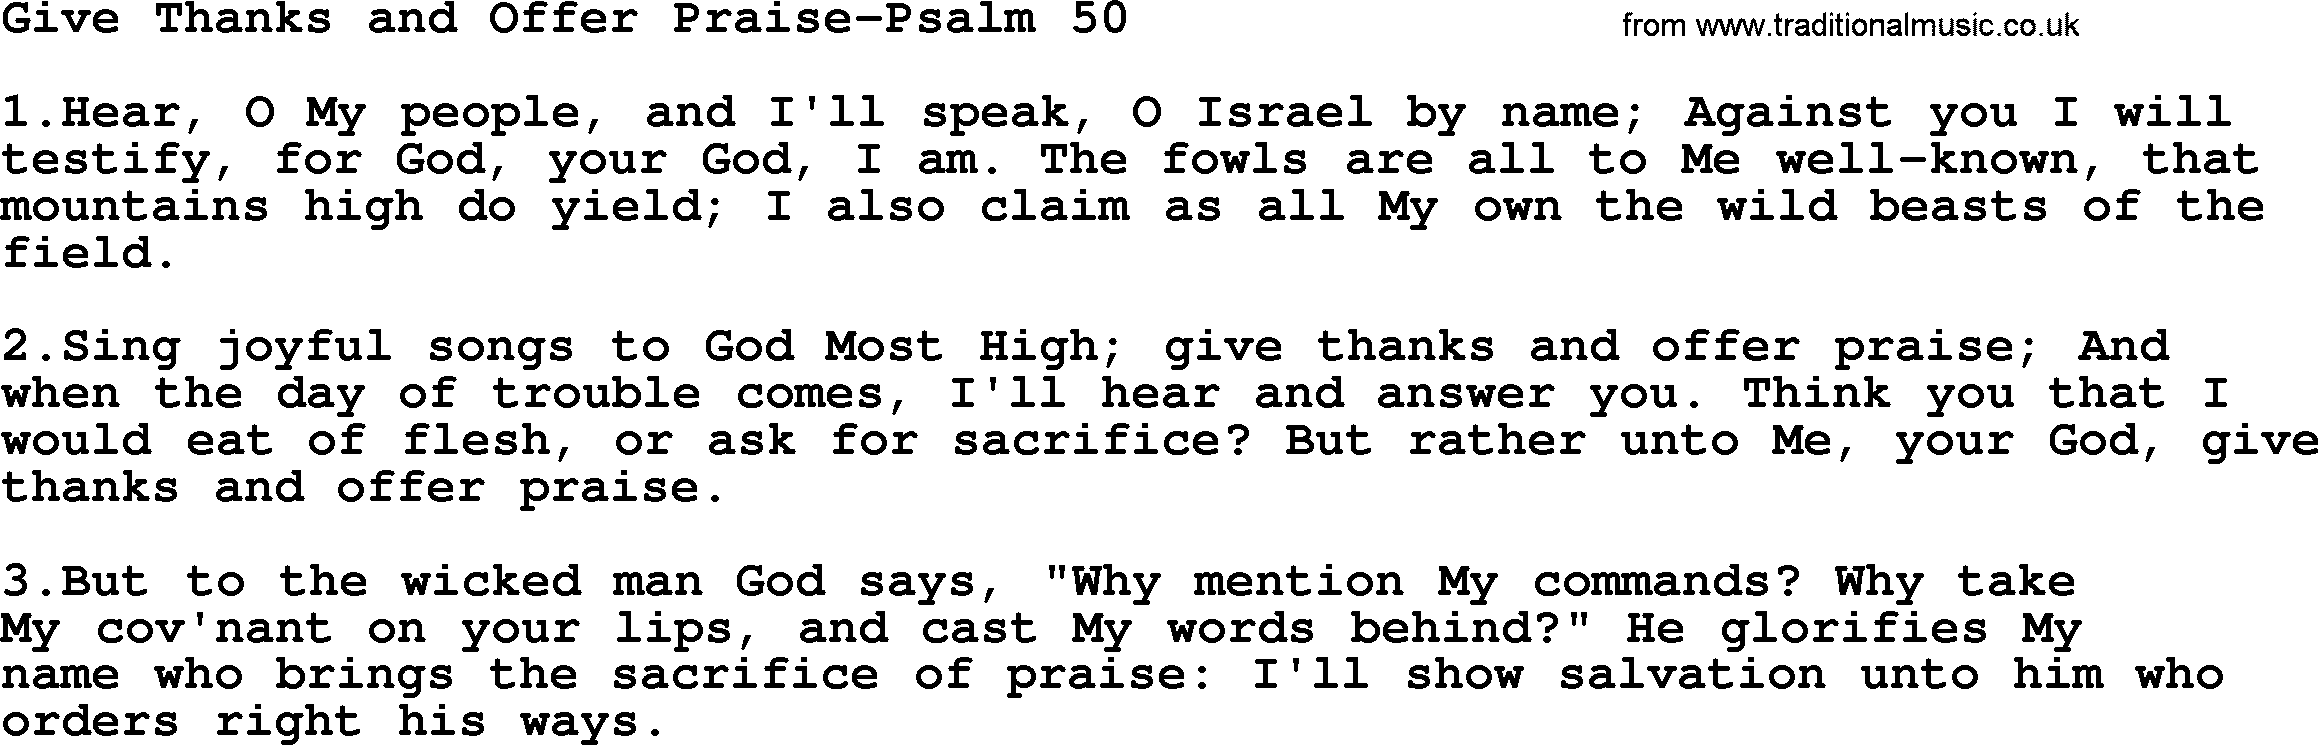 Hymns from the Psalms, Hymn: Give Thanks And Offer Praise-Psalm 50, lyrics with PDF